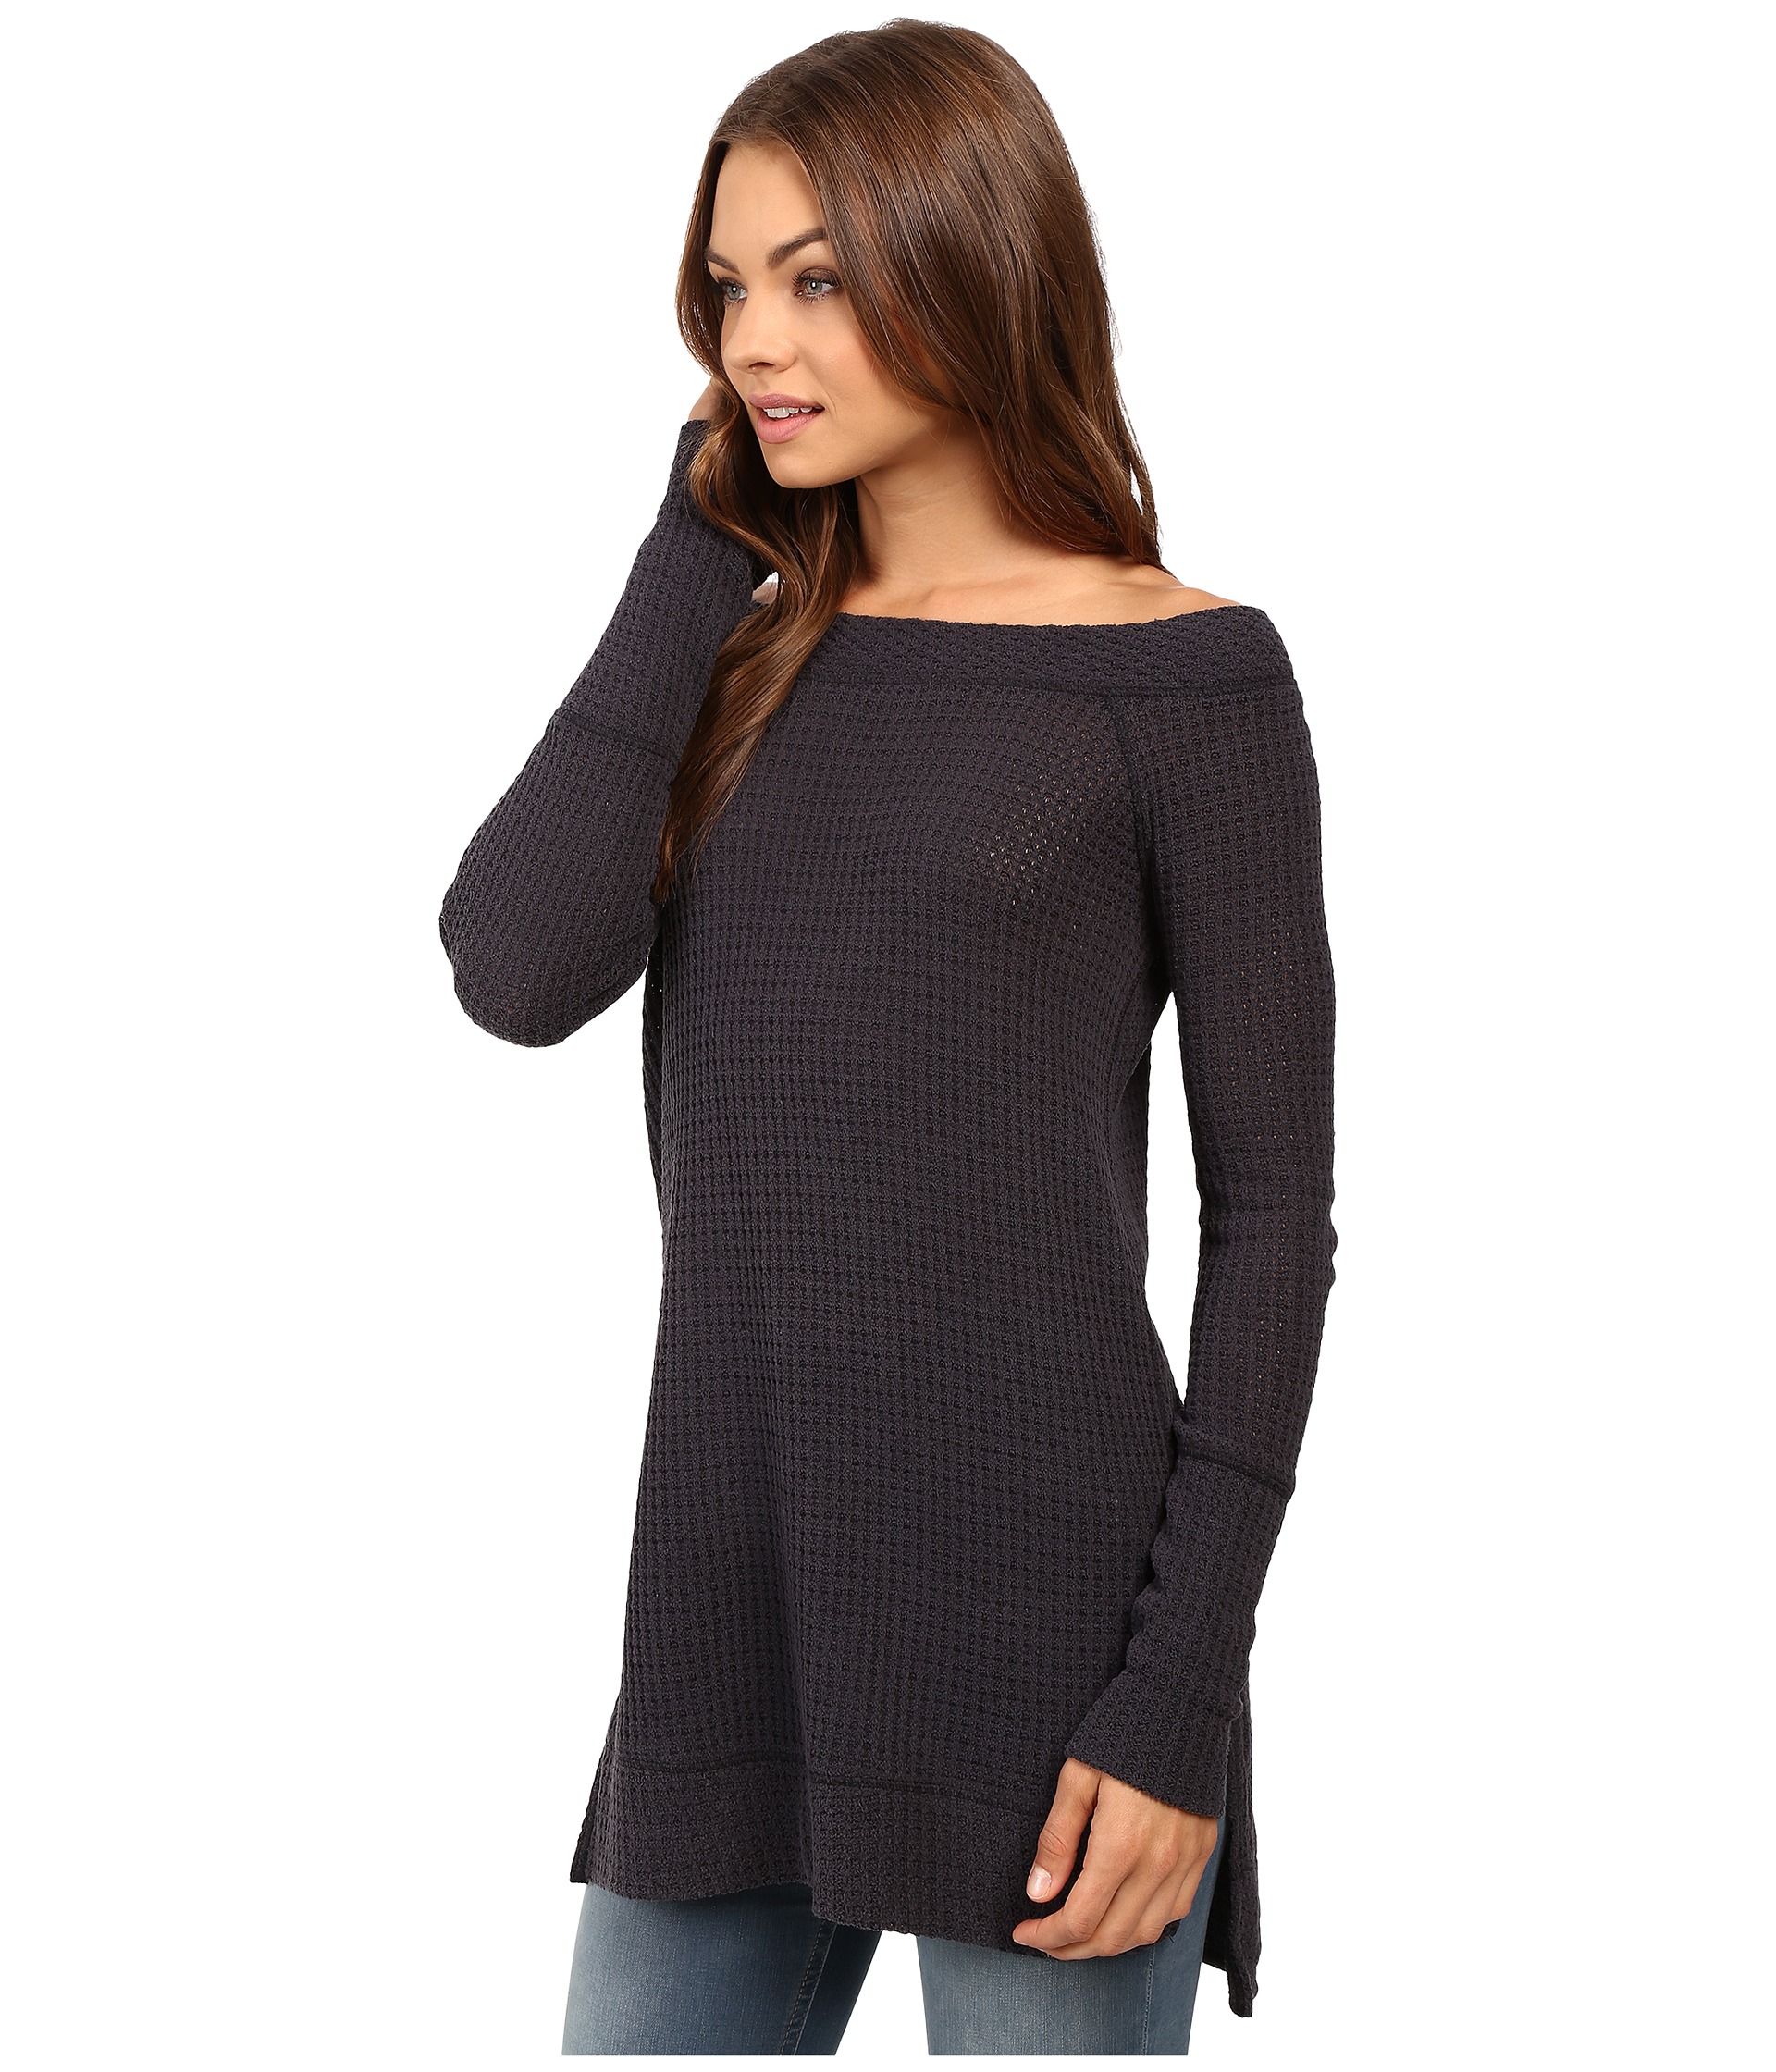 Free People Kate Thermal at Zappos.com